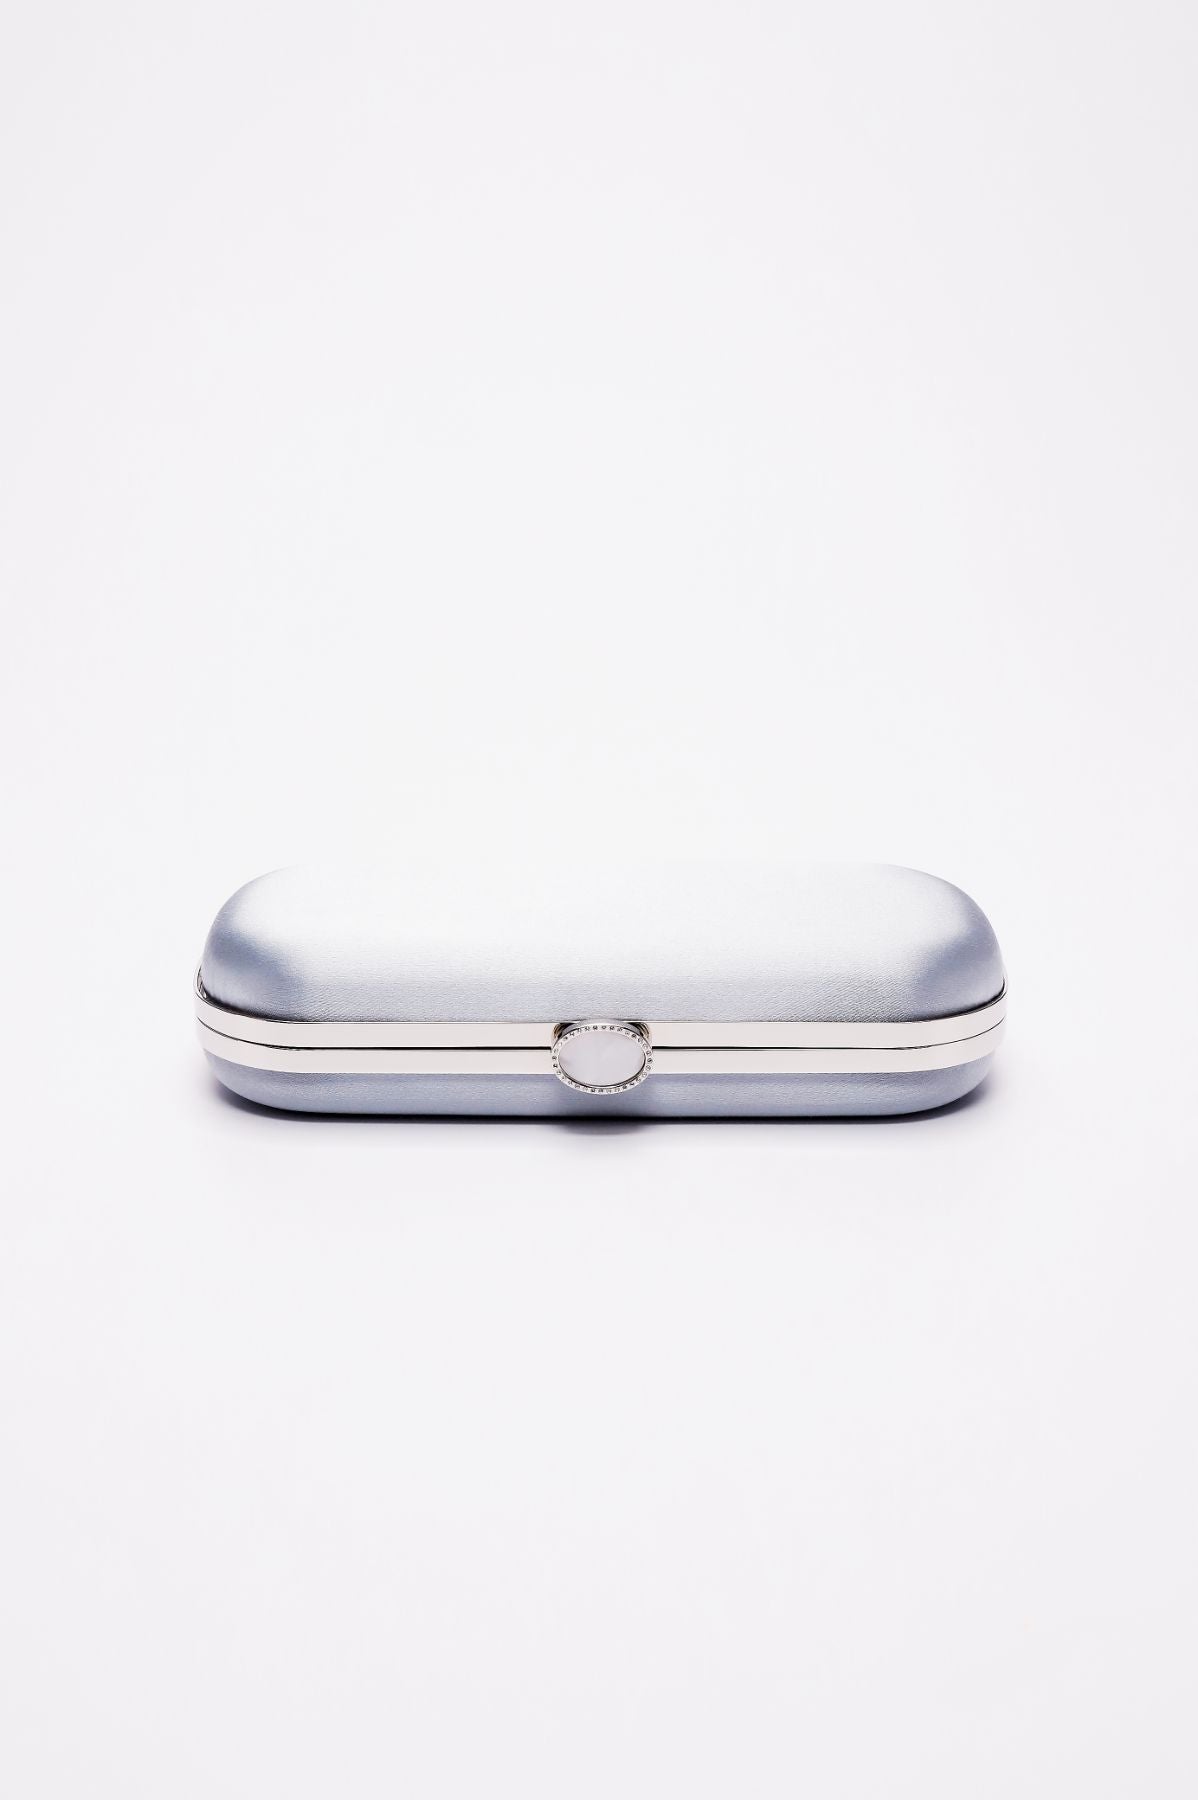 The Bella Rosa Collection Steel Blue Eyeglass Case on a white background.